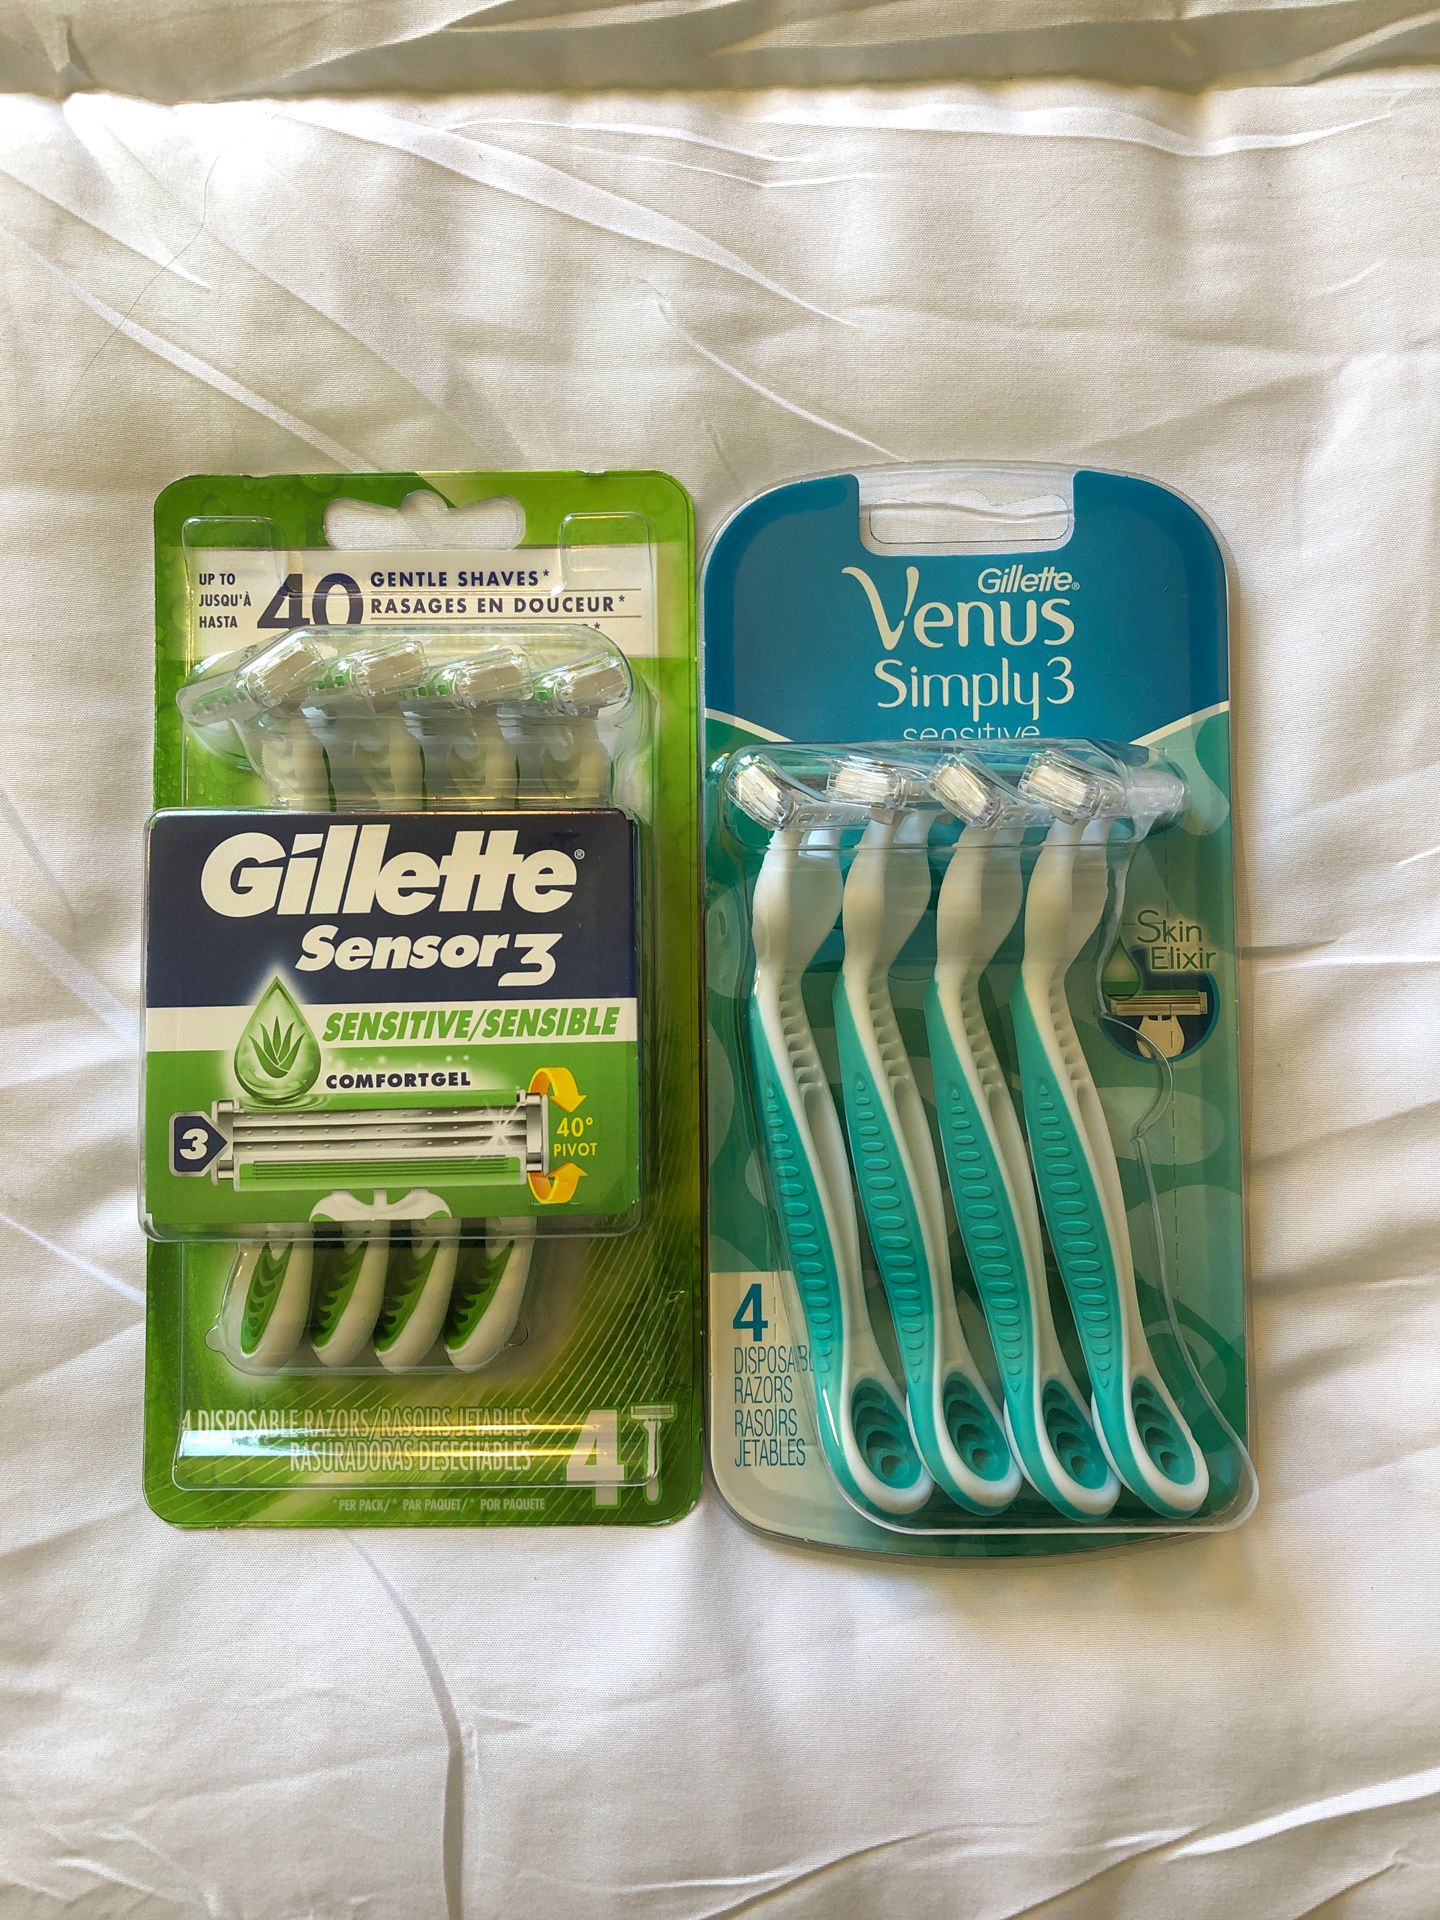 Razors - new, His and hers bundle. Gillette and Venus